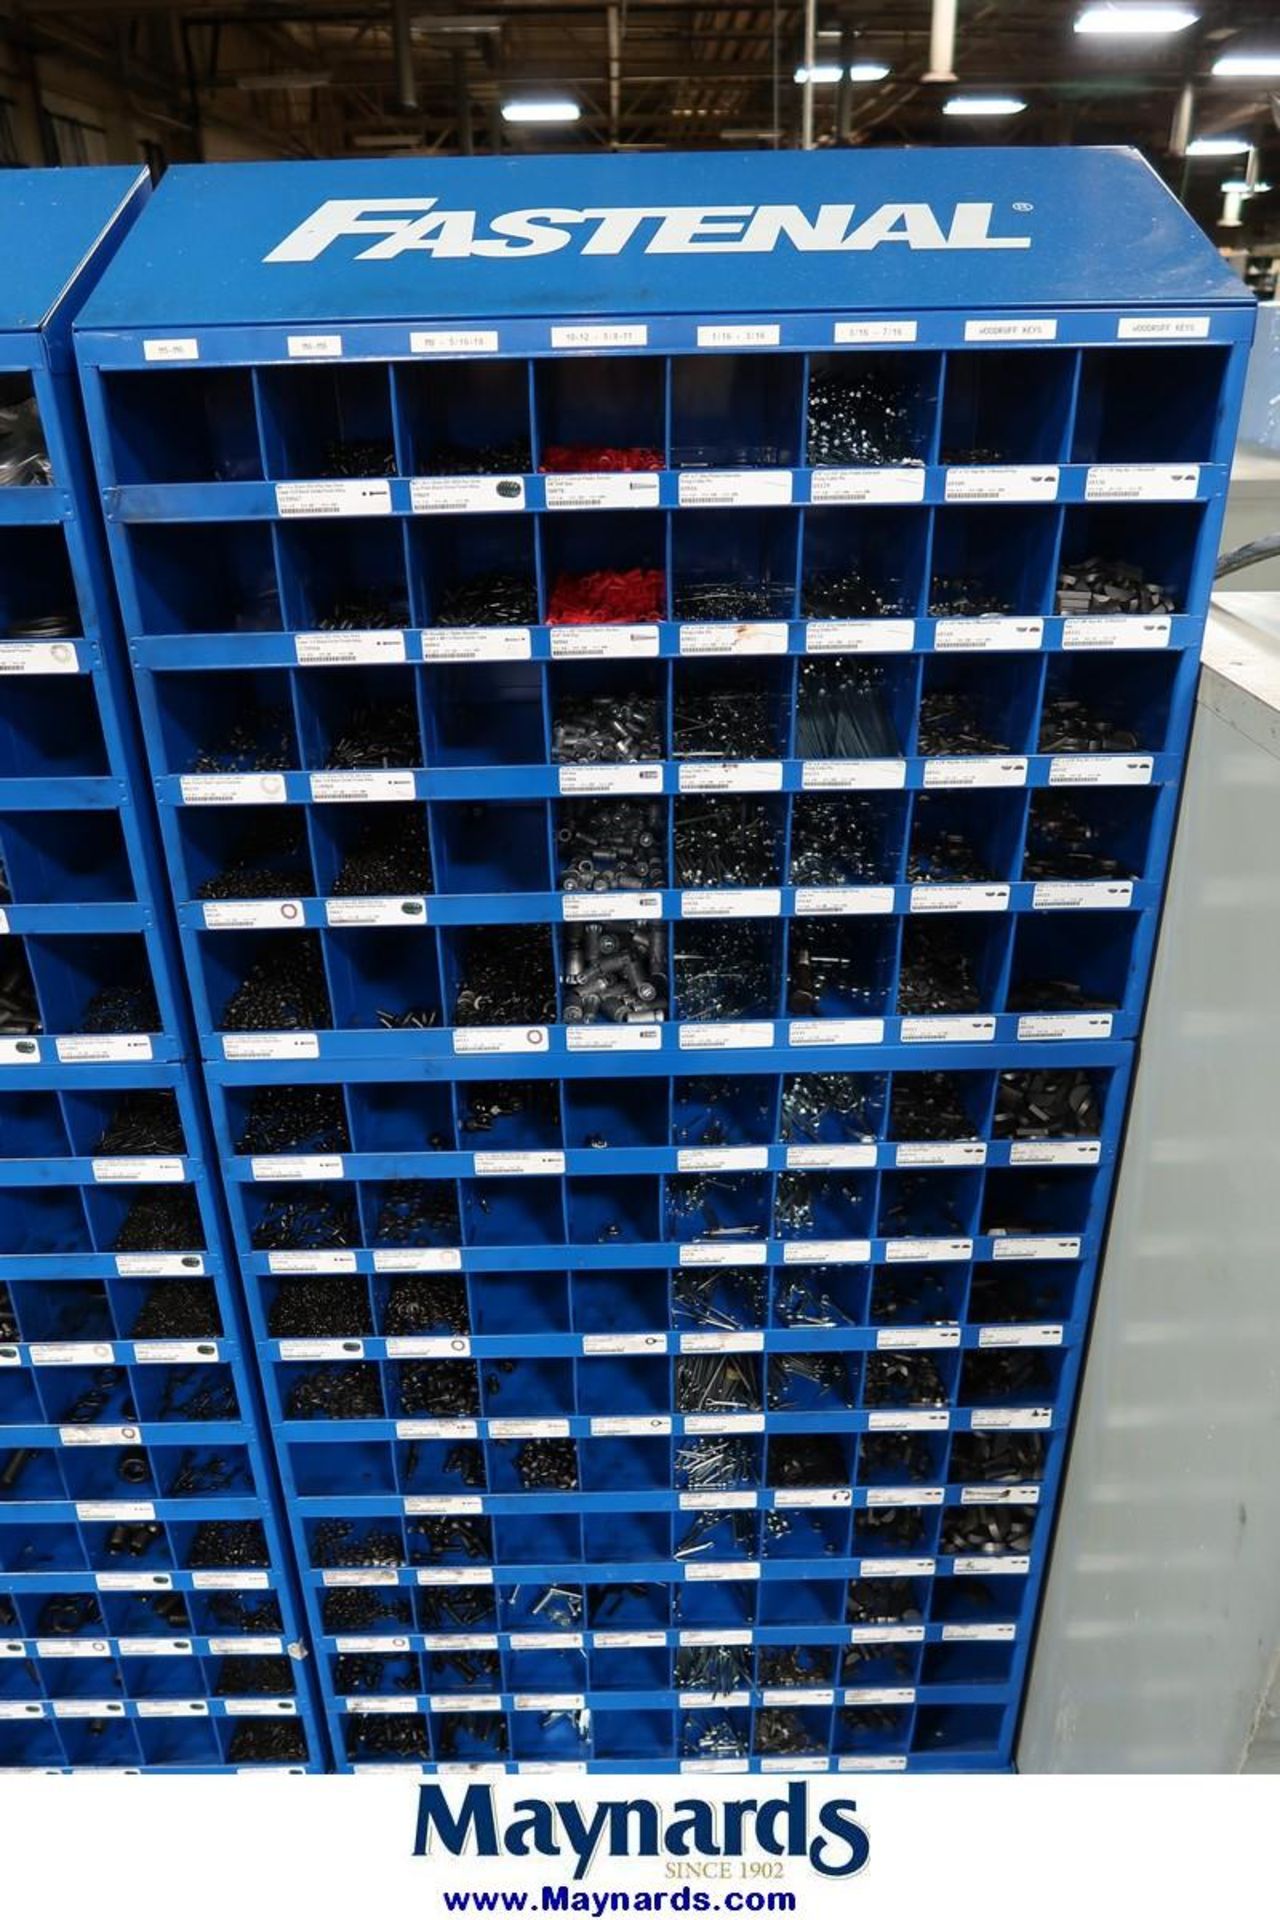 Fastenal 112-Compartment Bolt Bins - Image 2 of 3